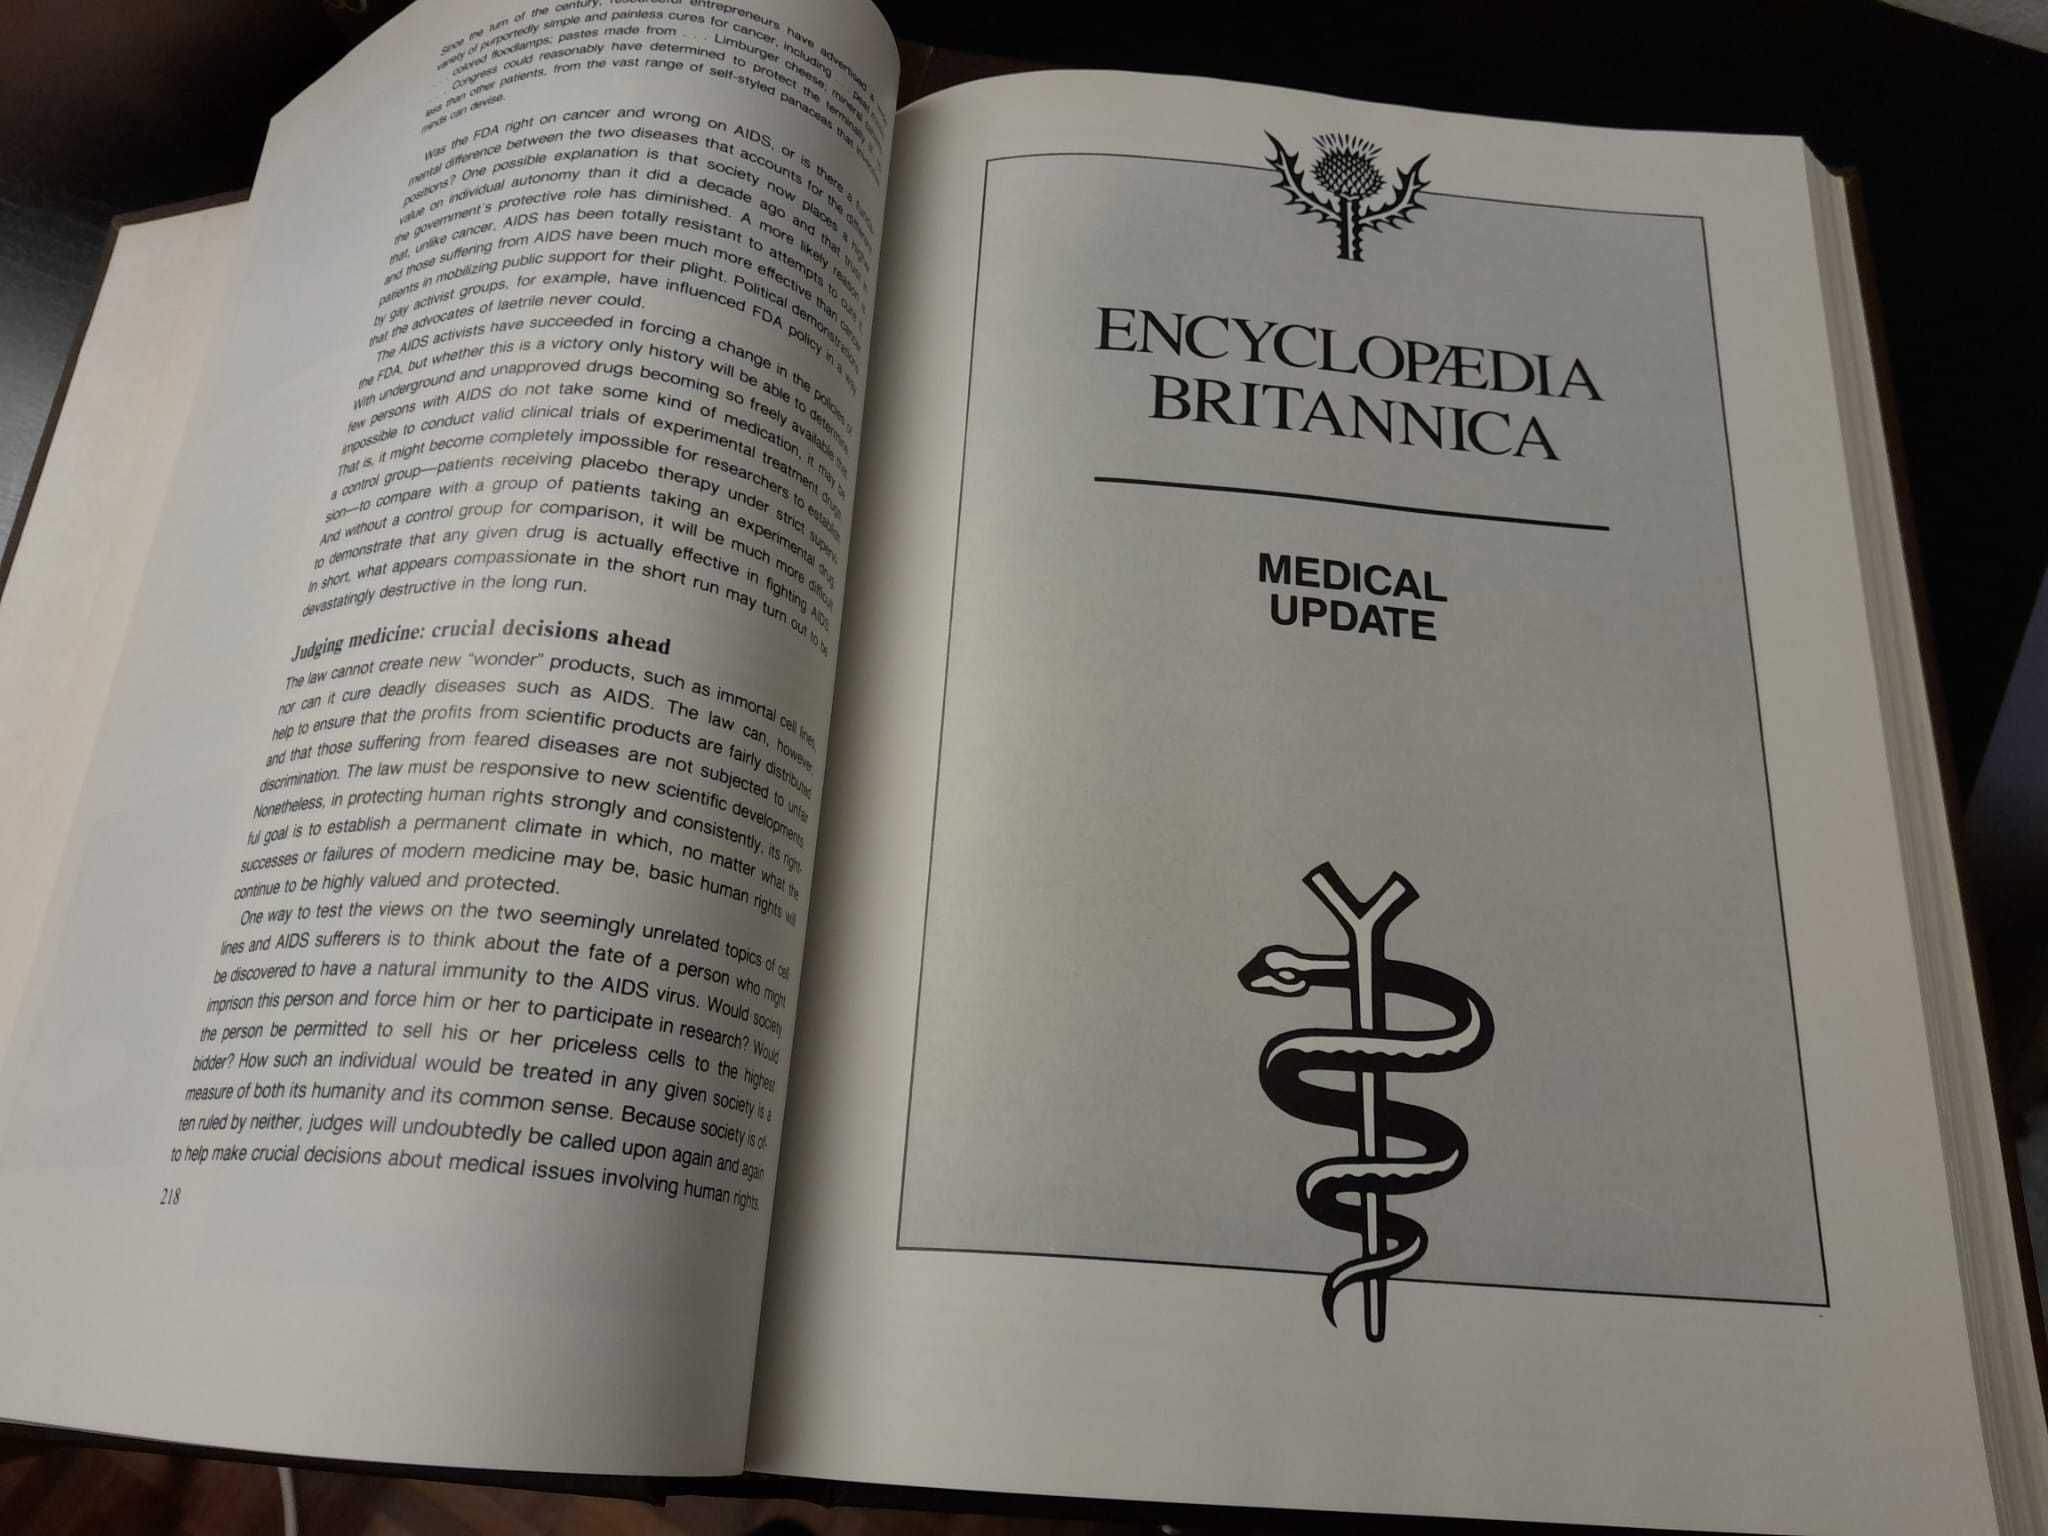 Medical and Health Annual - Encyclopedia Britannica